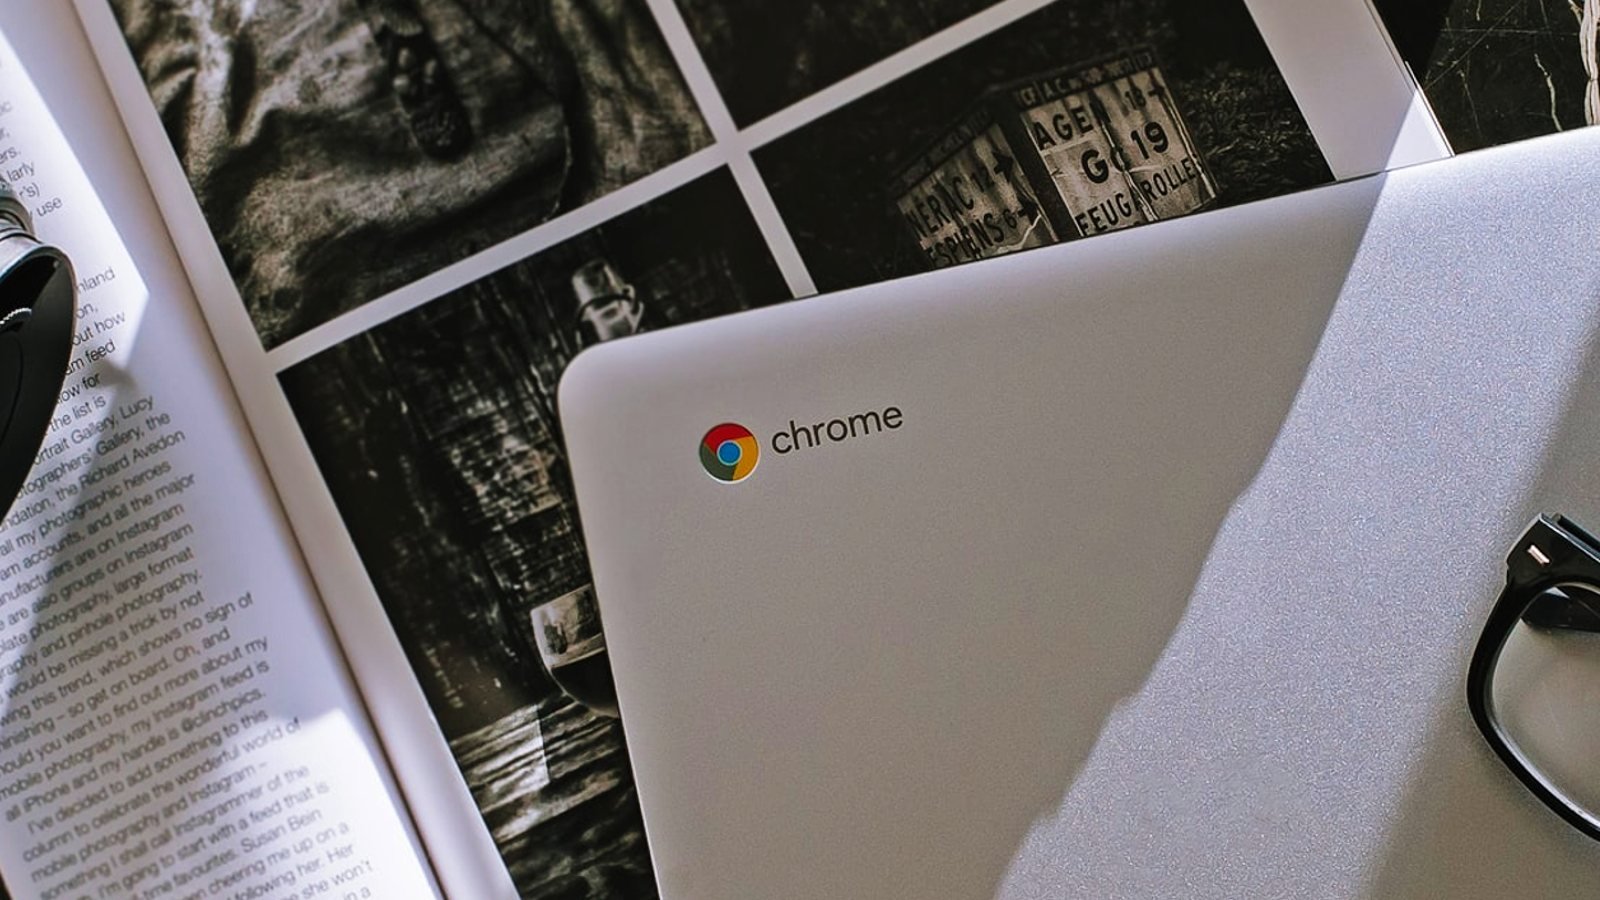 Google extends security update support for Chromebooks to 10 years – Source: www.bleepingcomputer.com